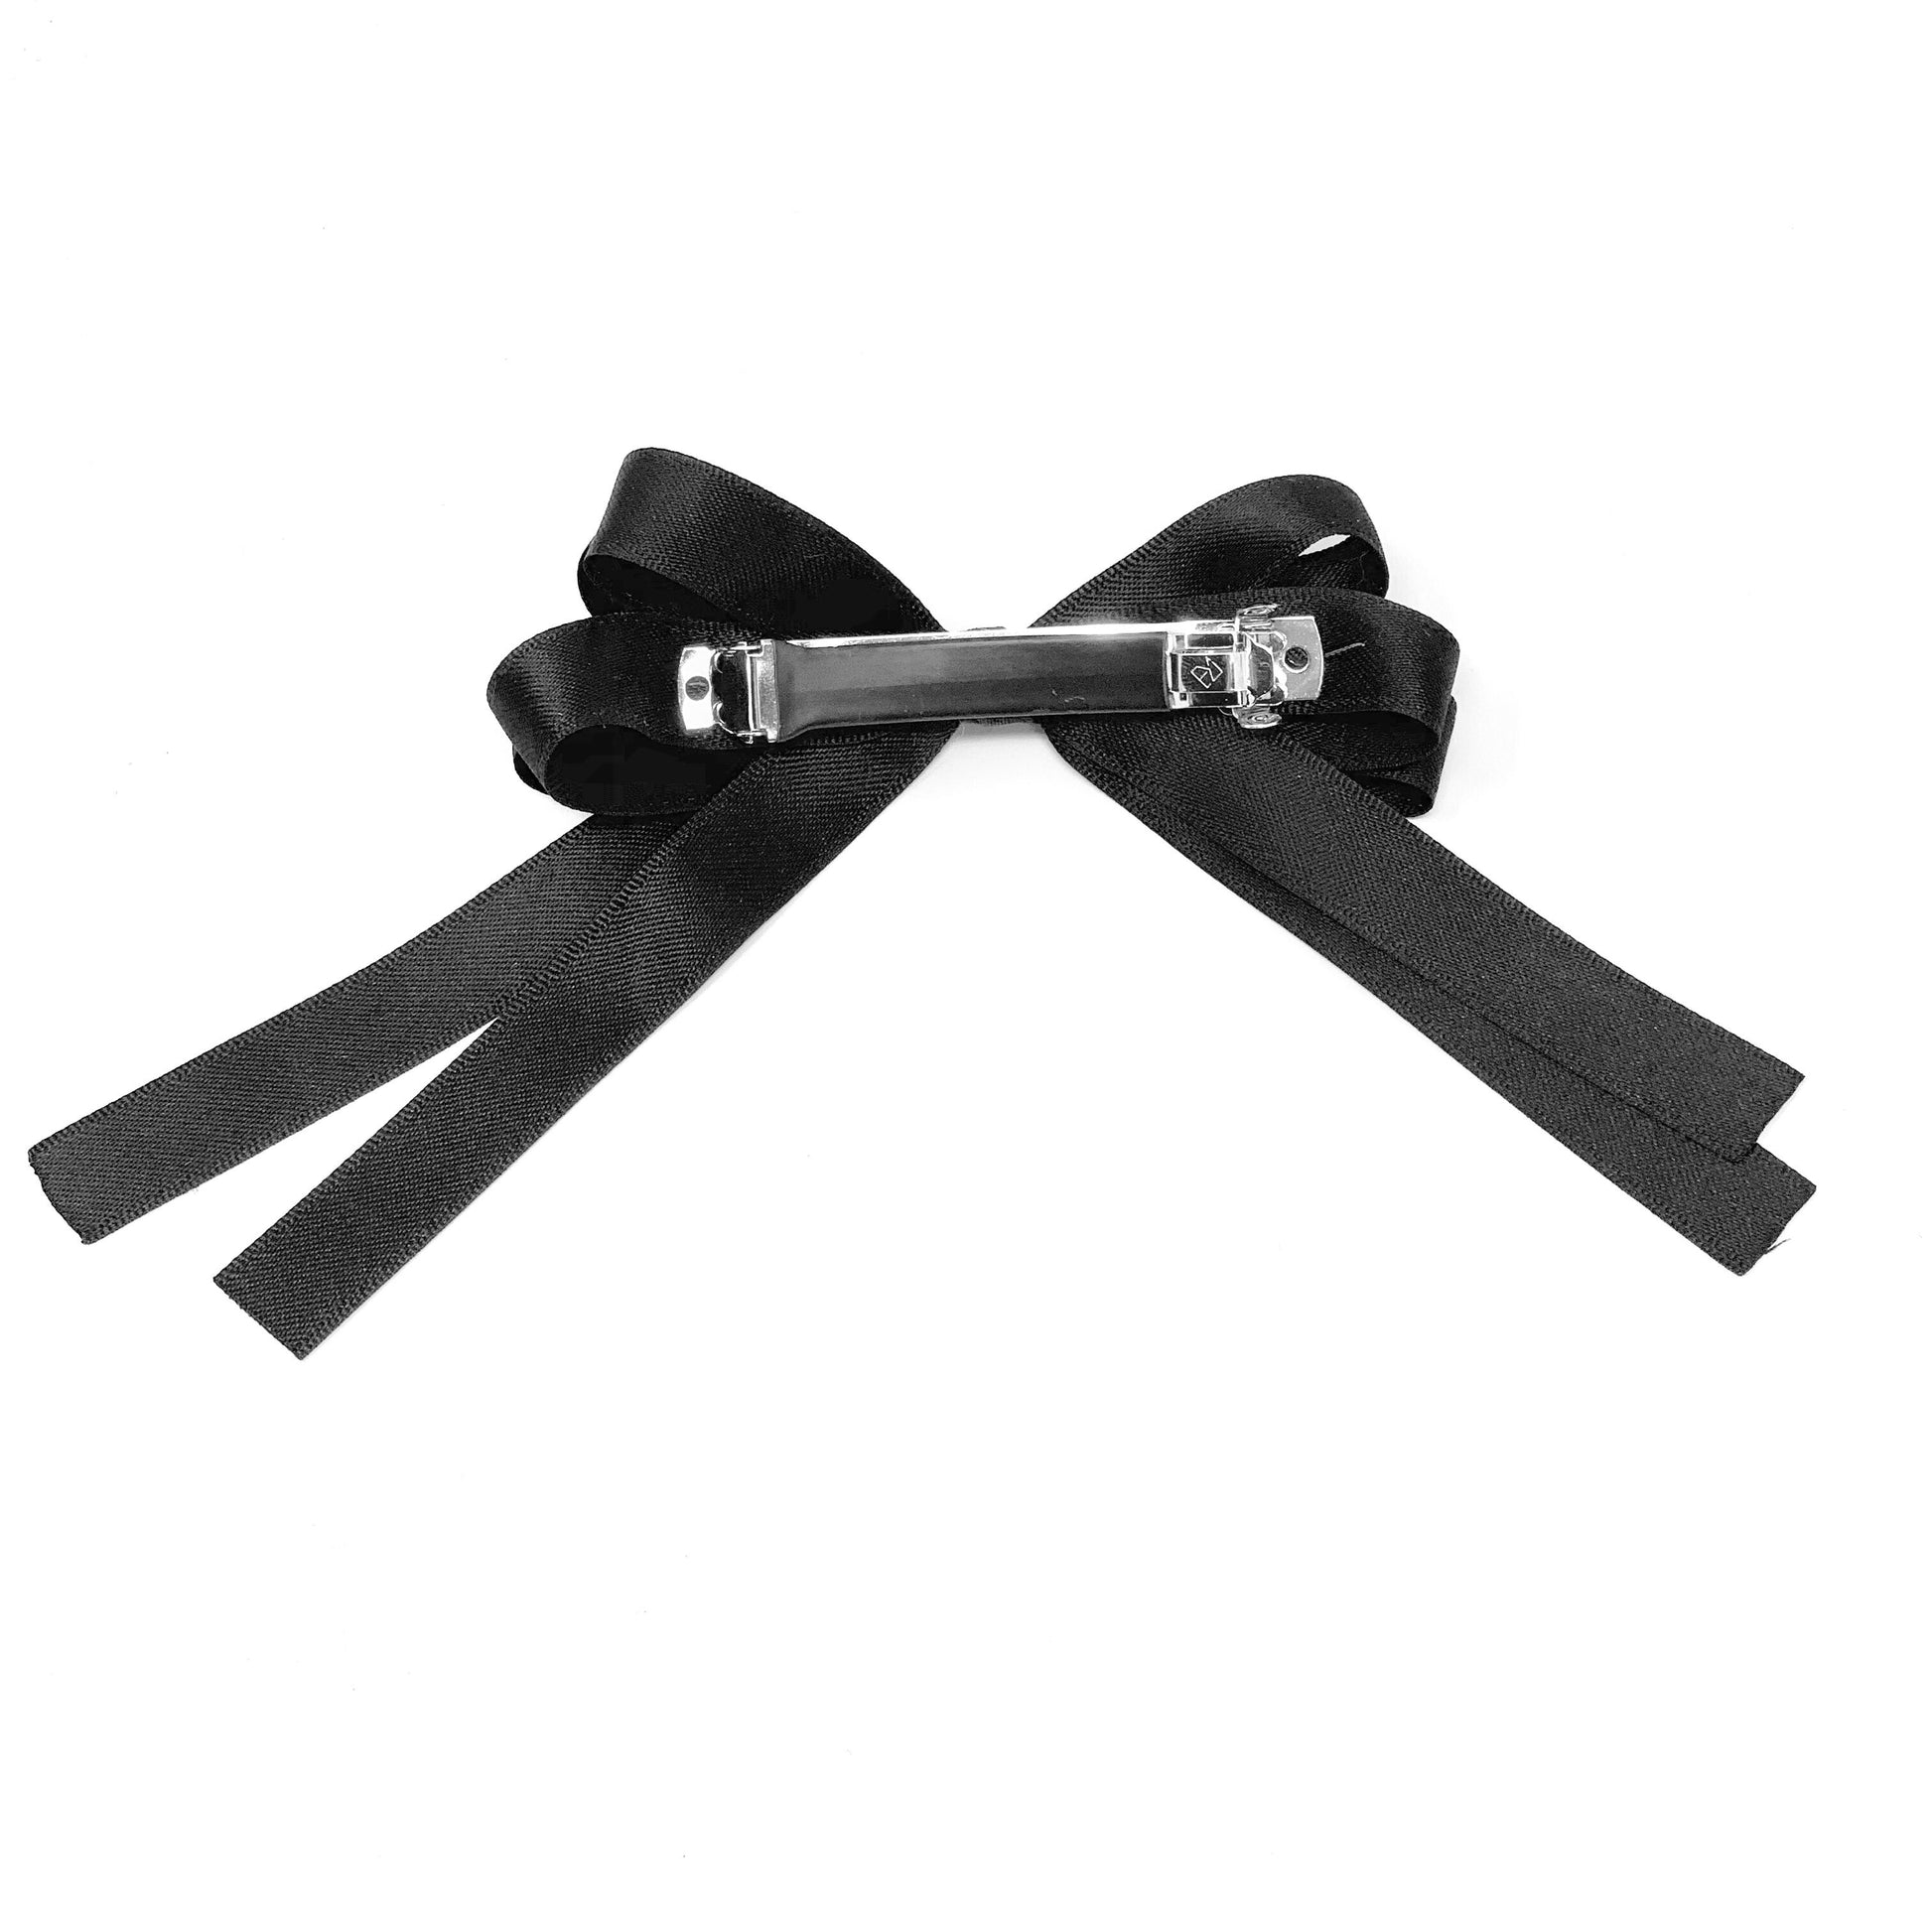 Hair clip with a satin bow in black